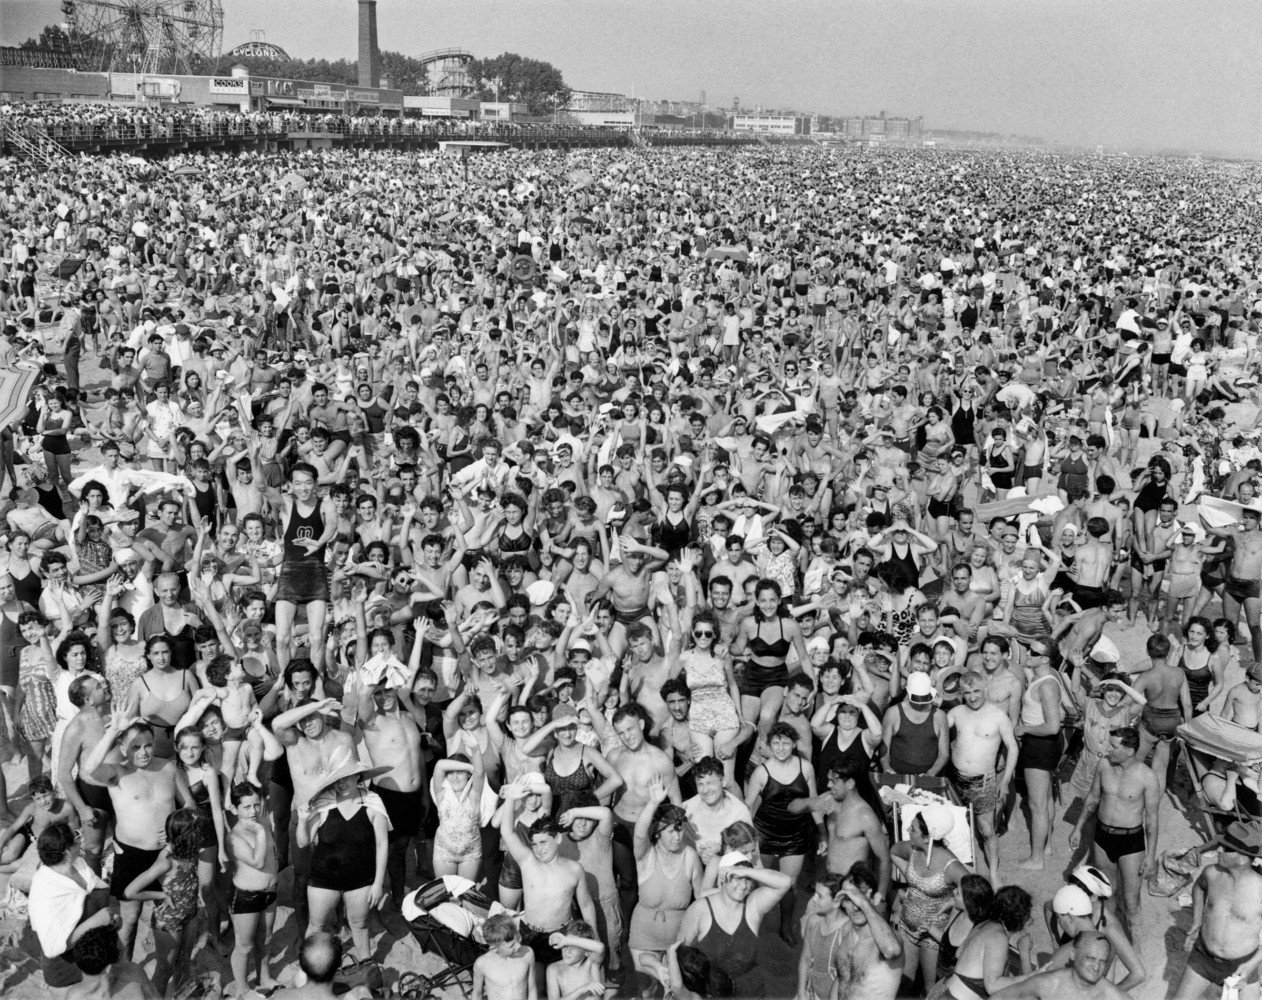 [Afternoon crowd at Coney Island, Brooklyn, New York], July 21, 1940 © Weegee Archive/International Center of Photography